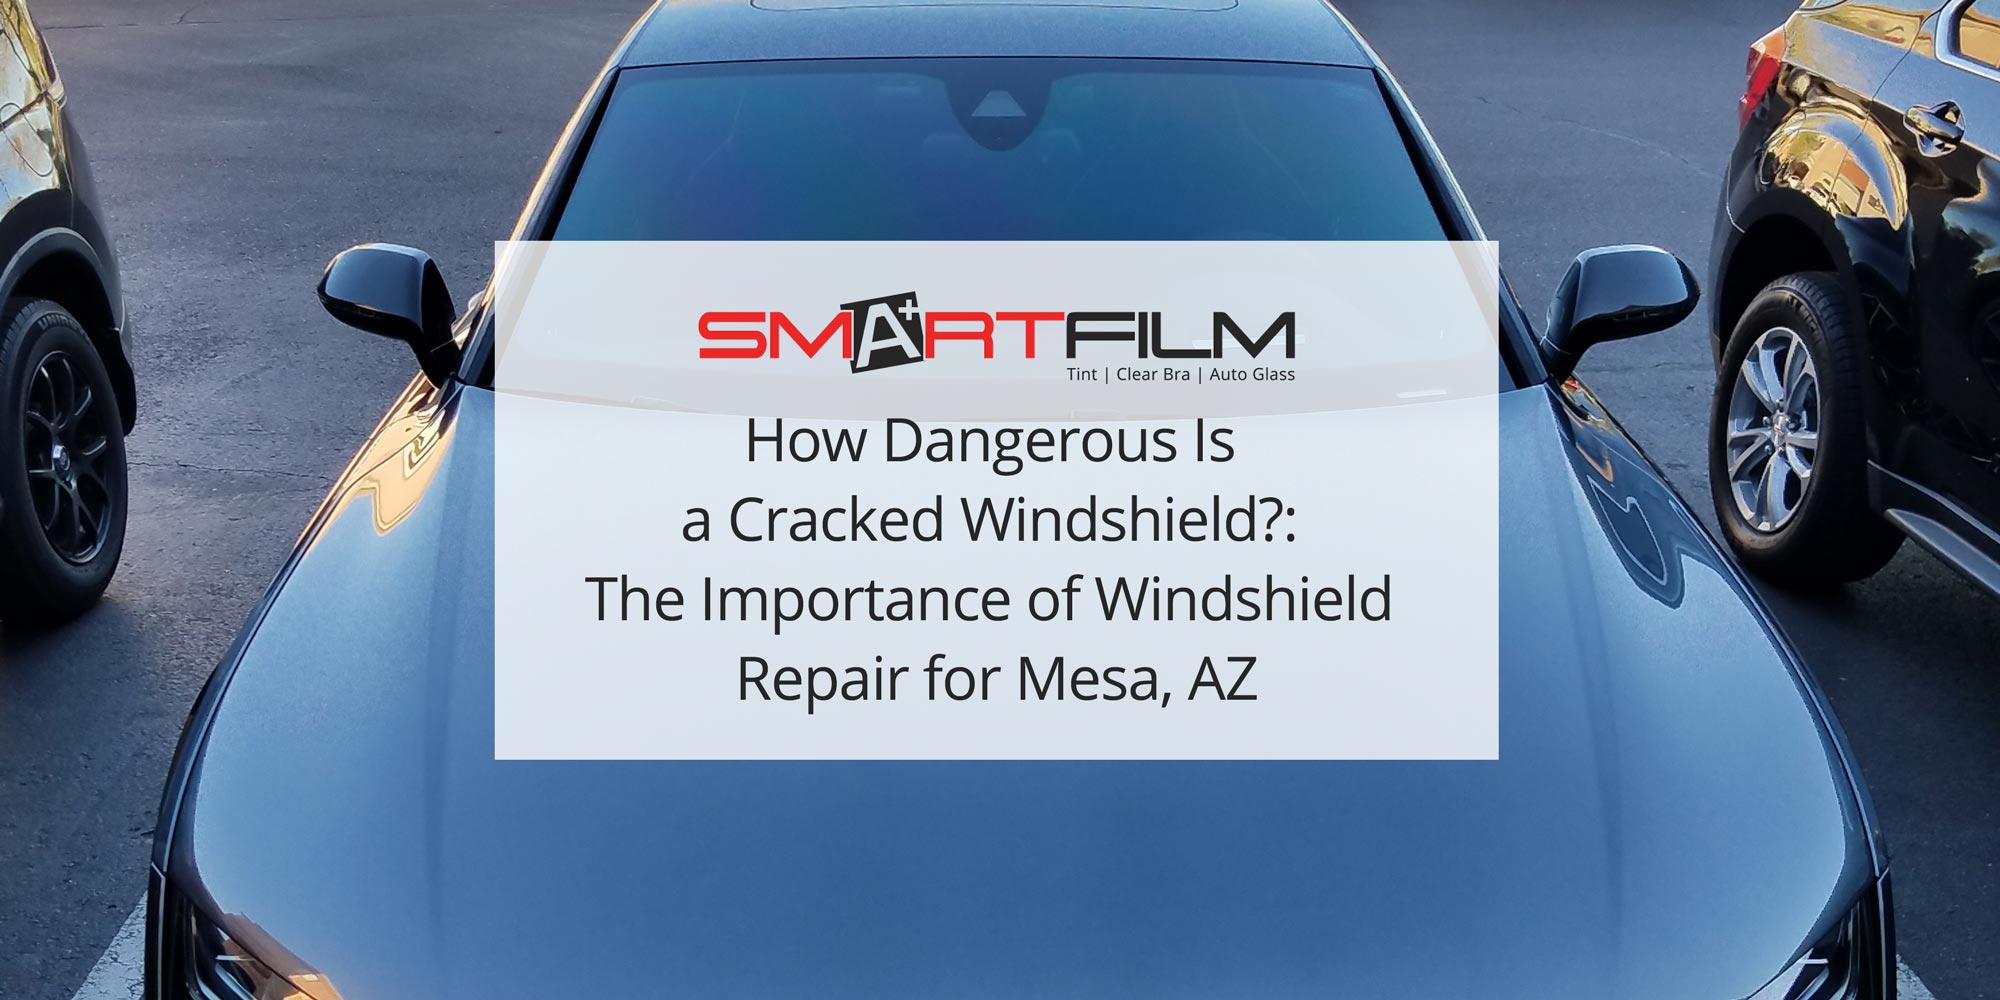 How Dangerous Is a Cracked Windshield?: The Importance of Windshield Repair for Mesa, AZ